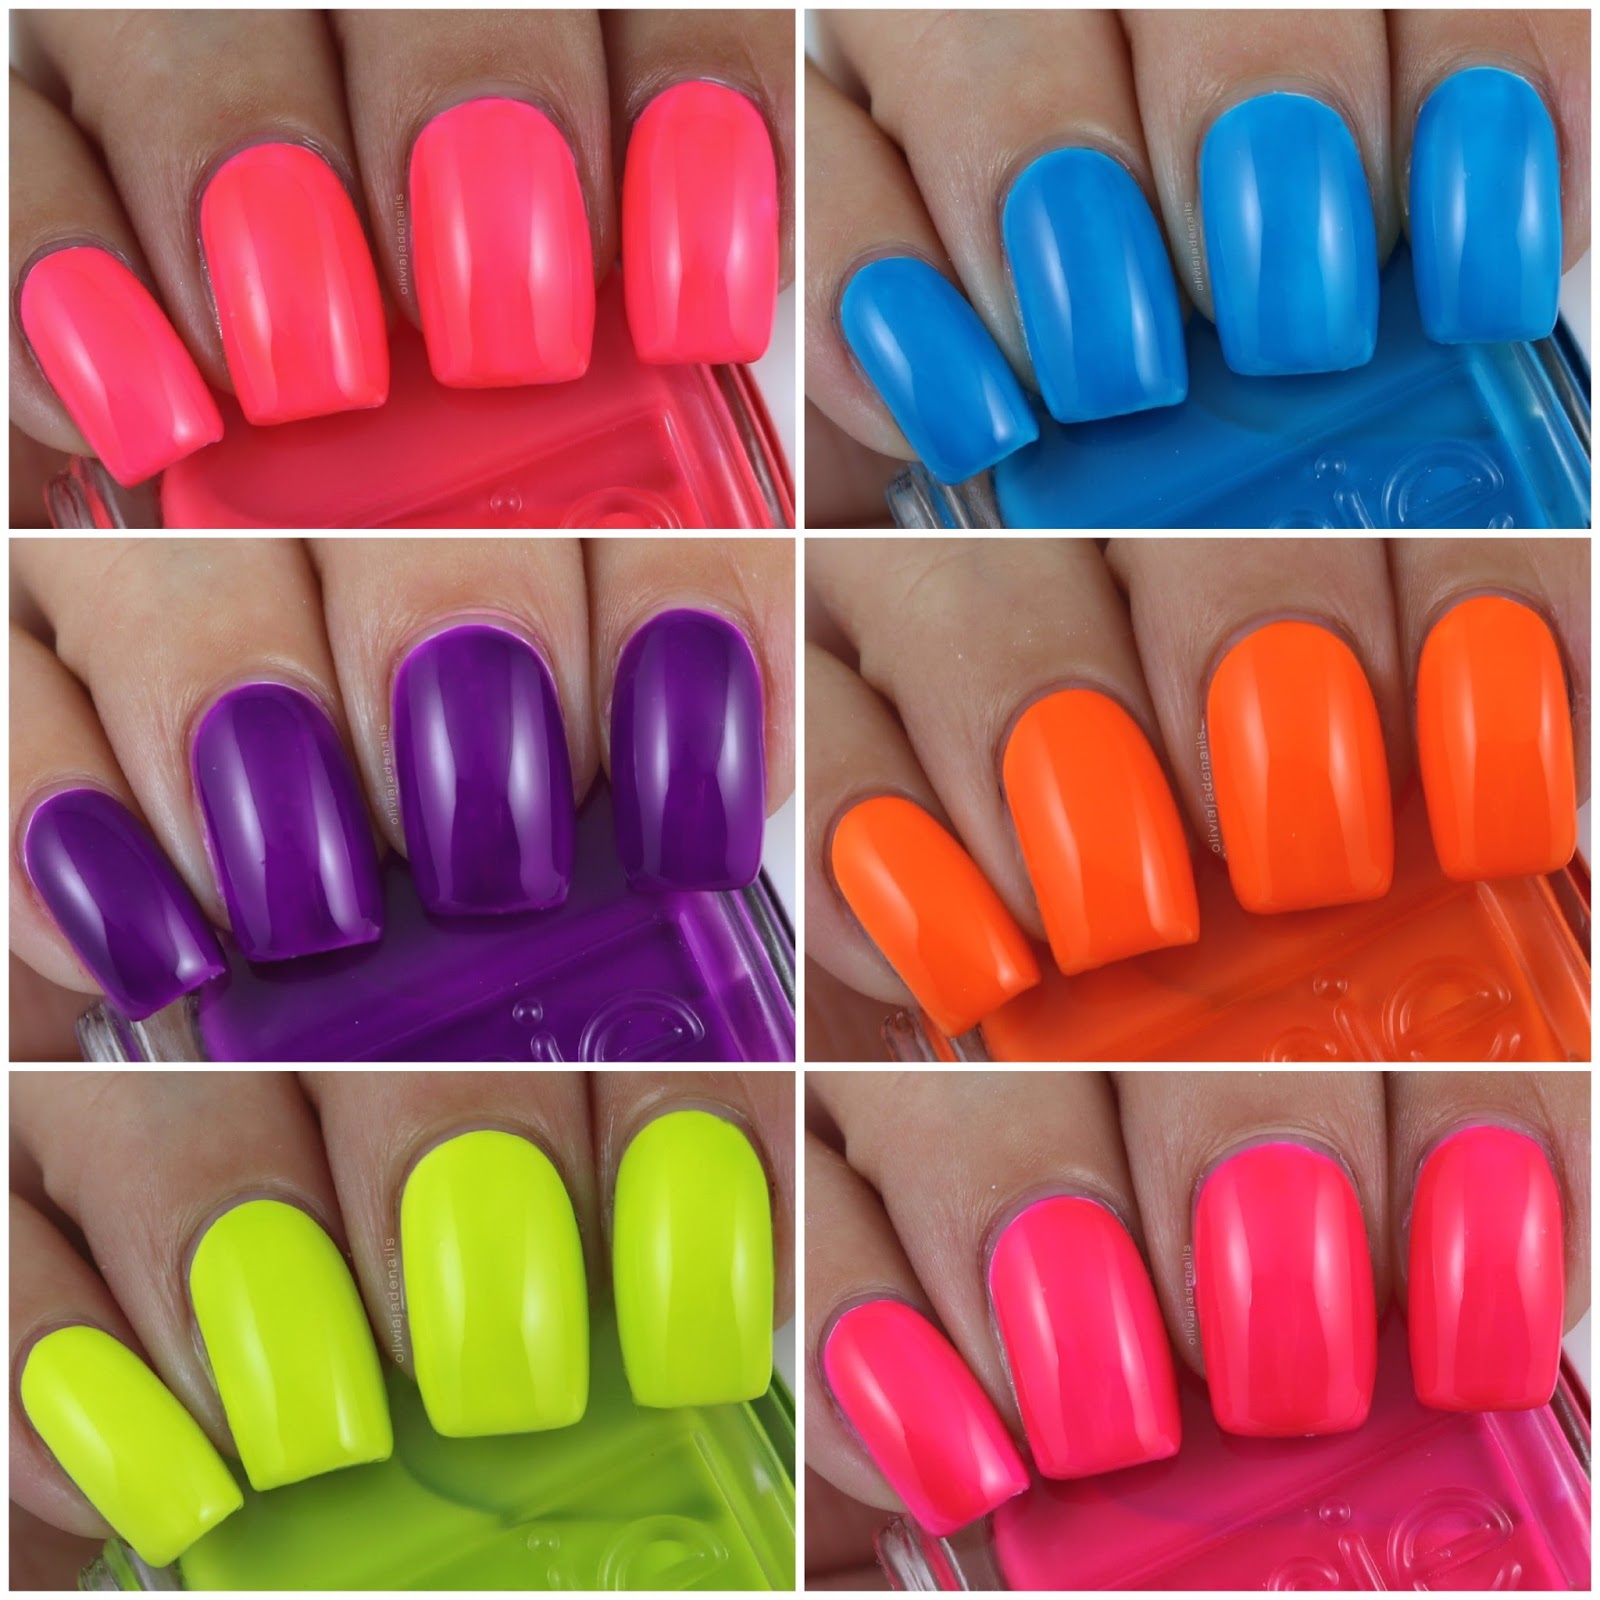 Olivia Jade Nails: Essie Neon 2016 Collection - Swatches & Review